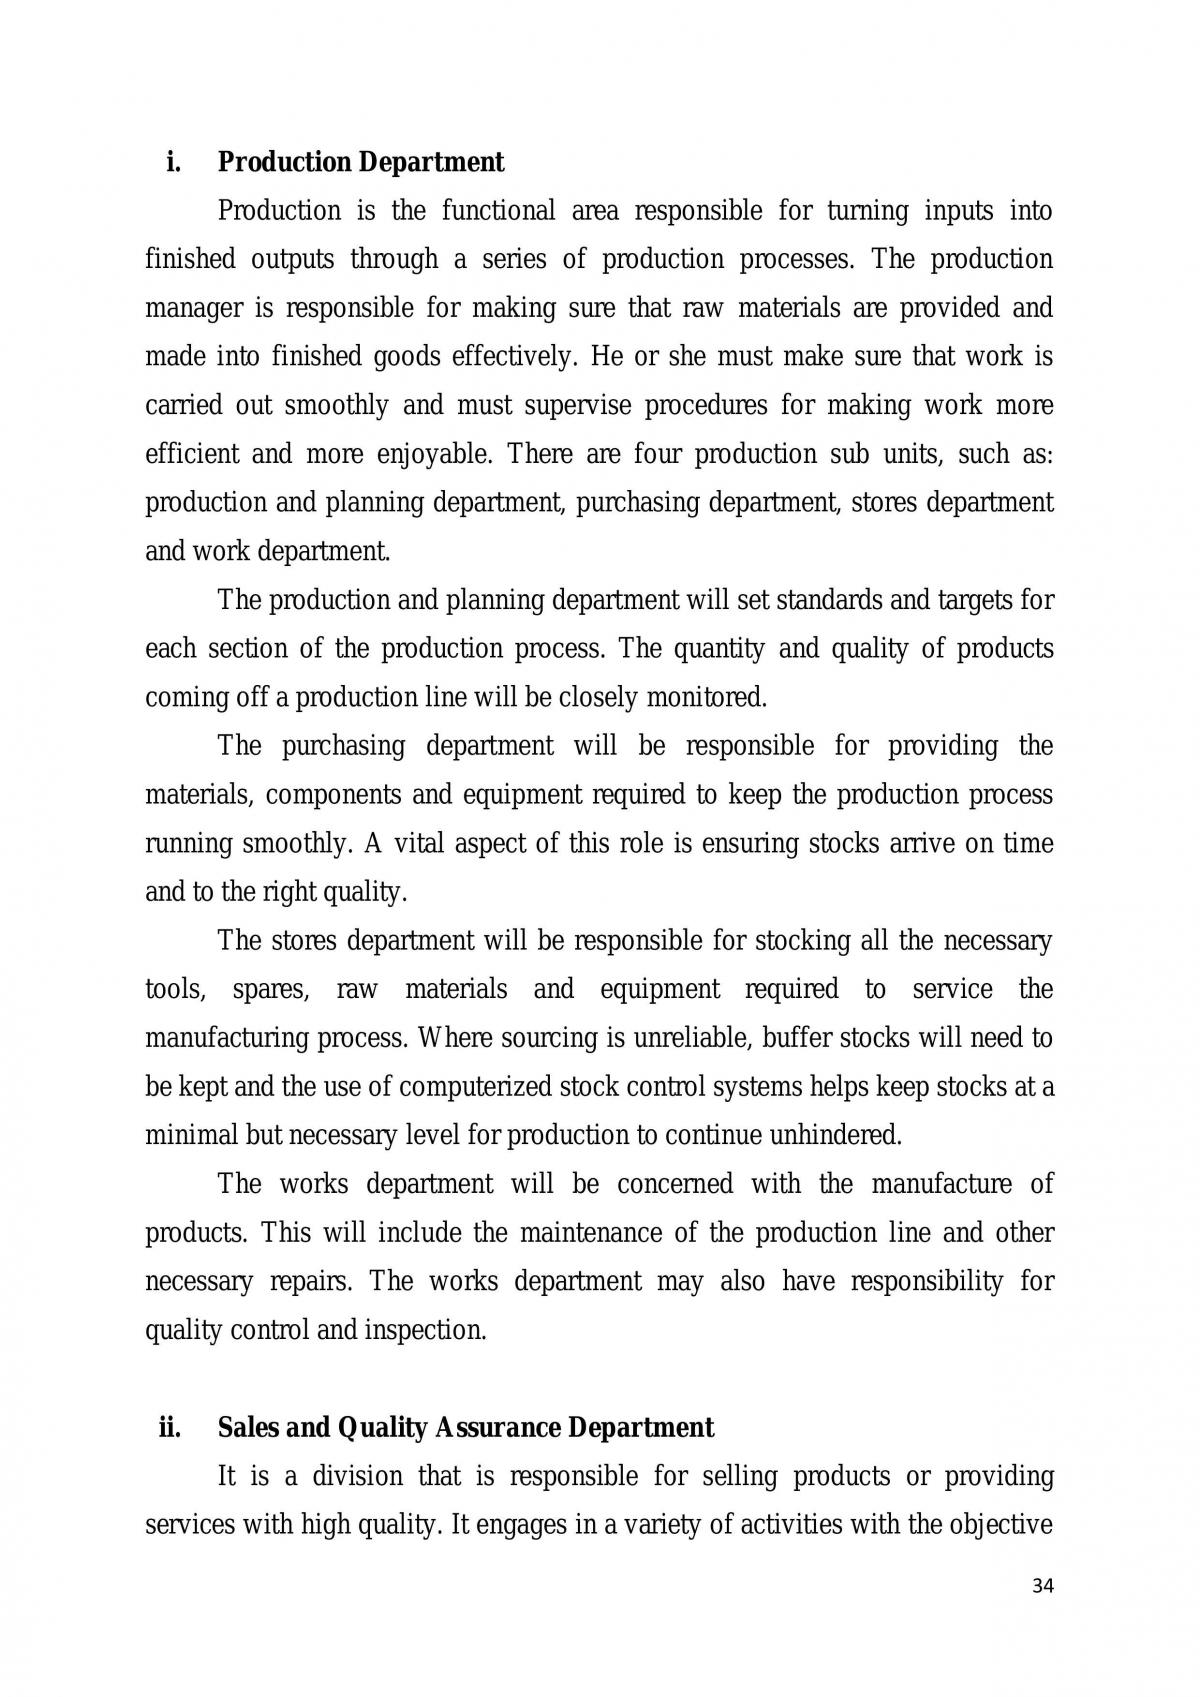 VR business plan  - Page 34